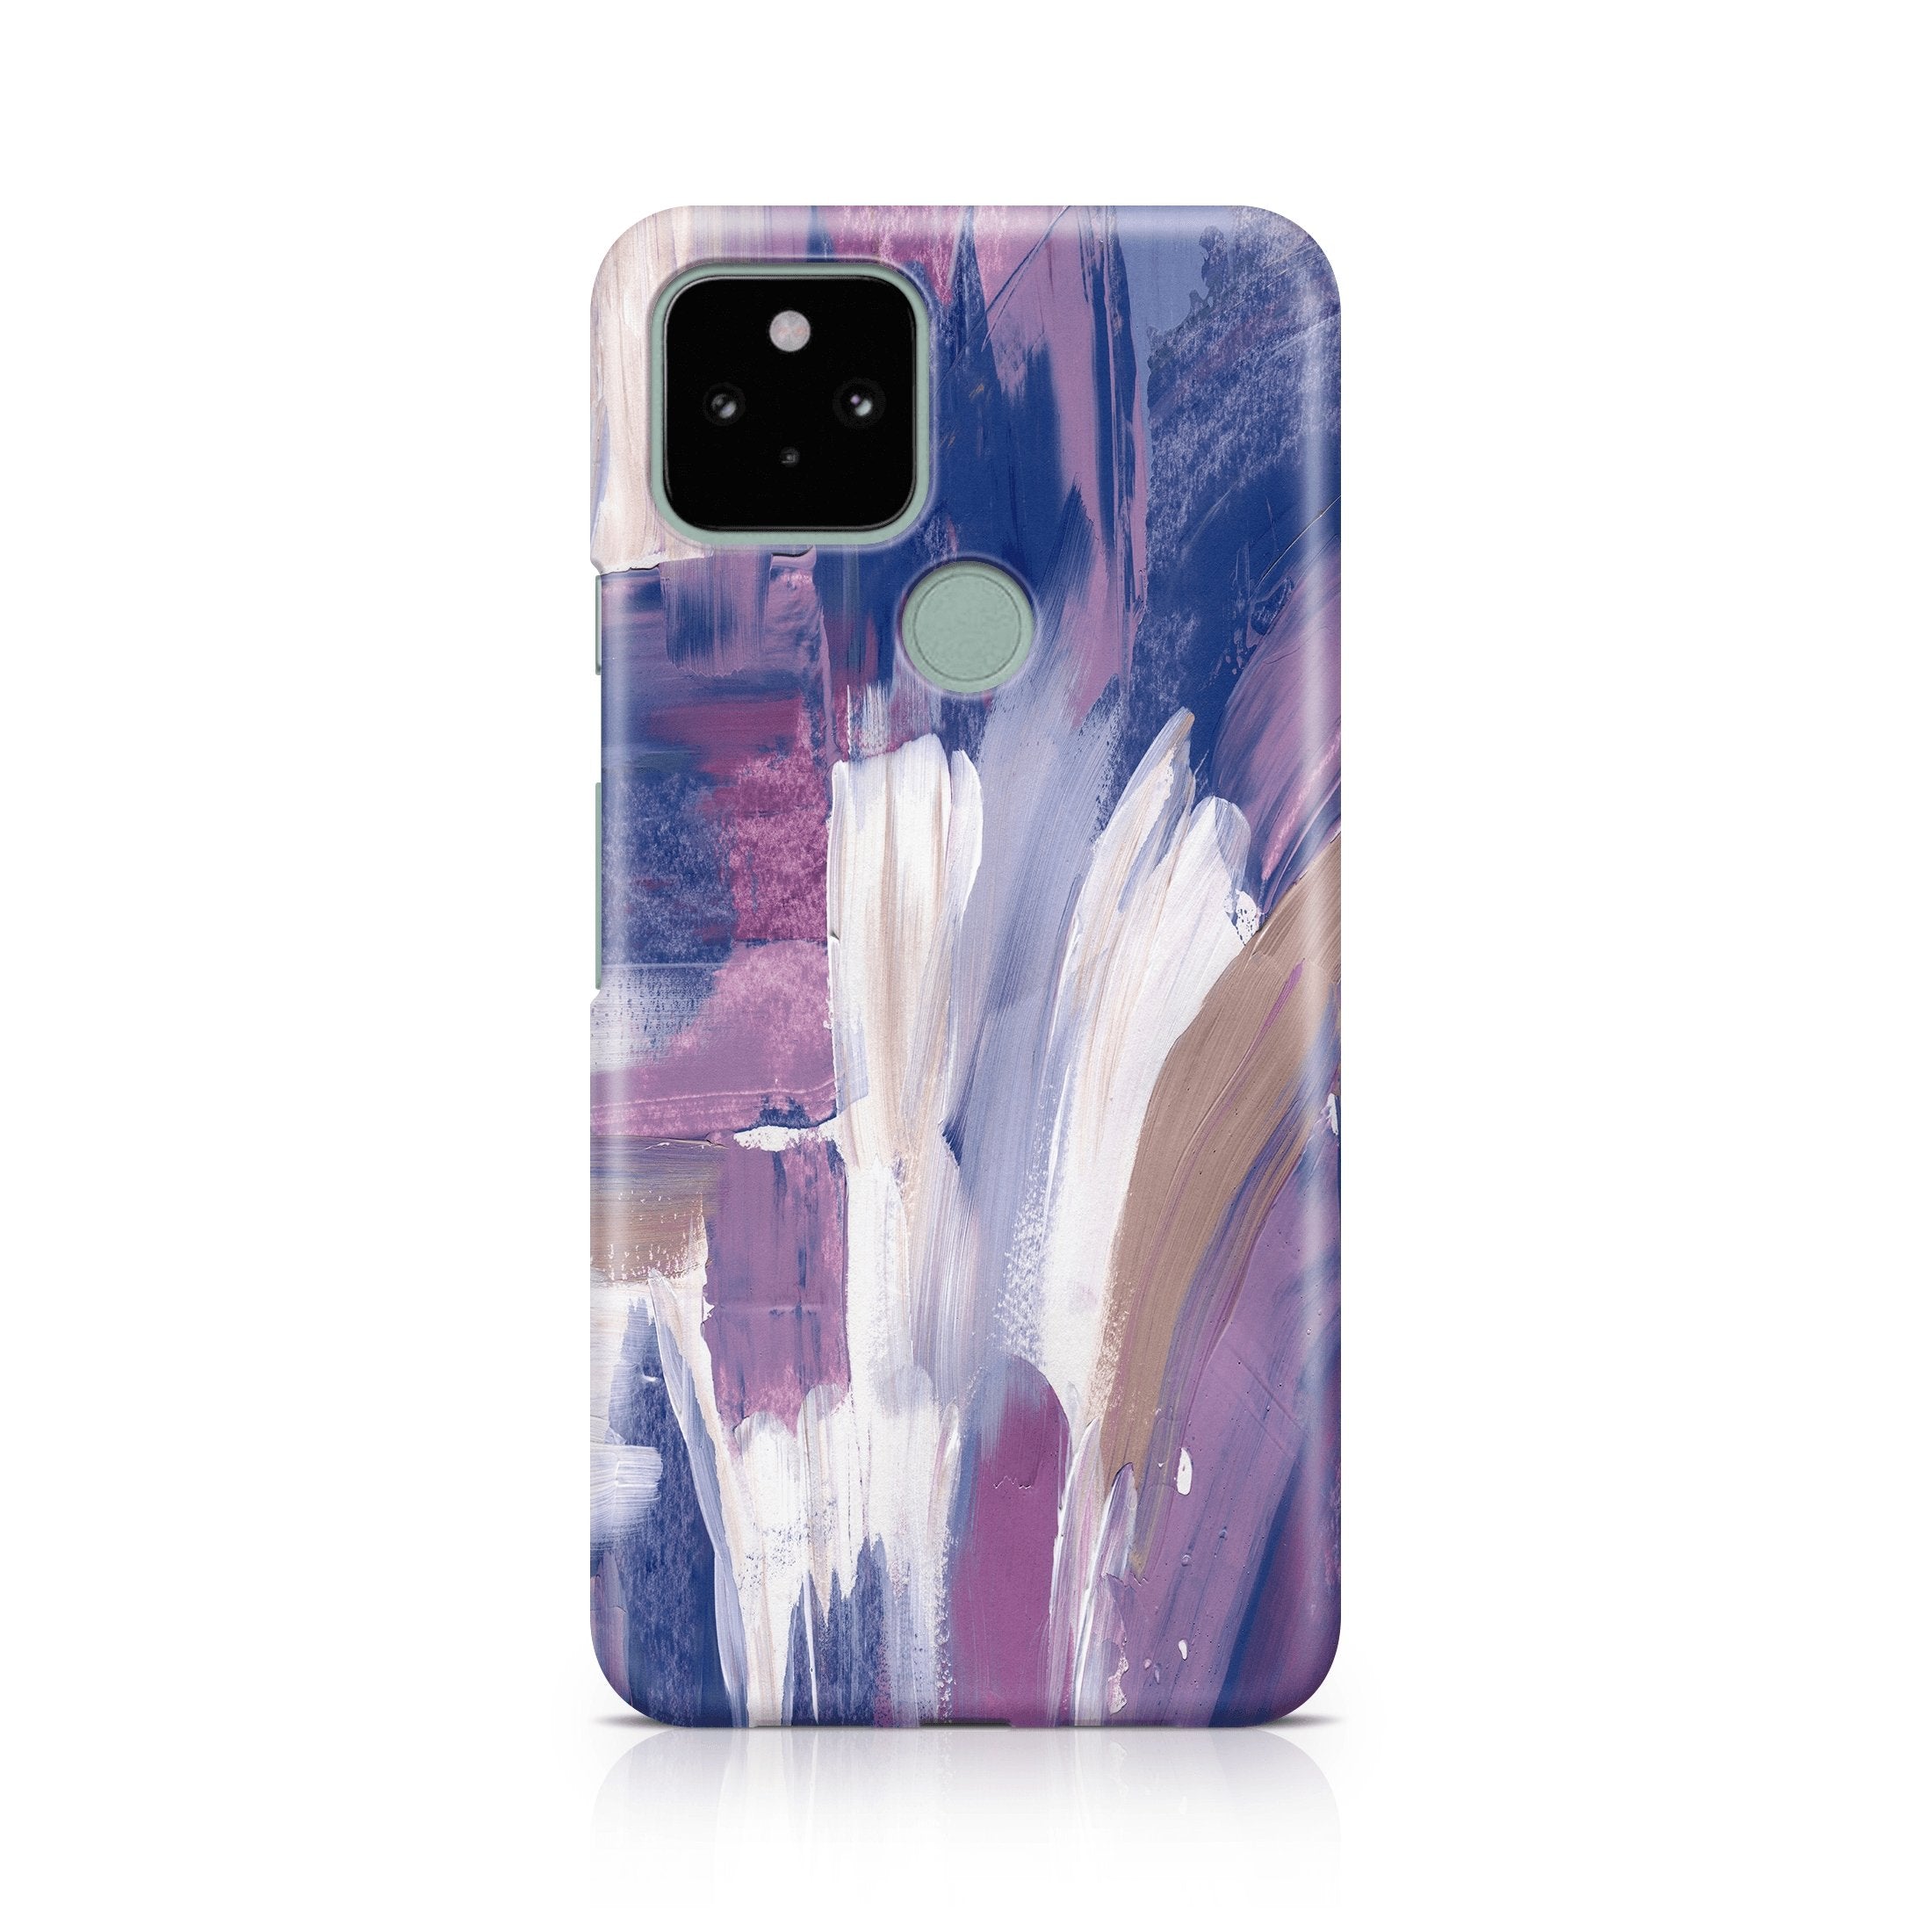 Makeup Blender I - Google phone case designs by CaseSwagger